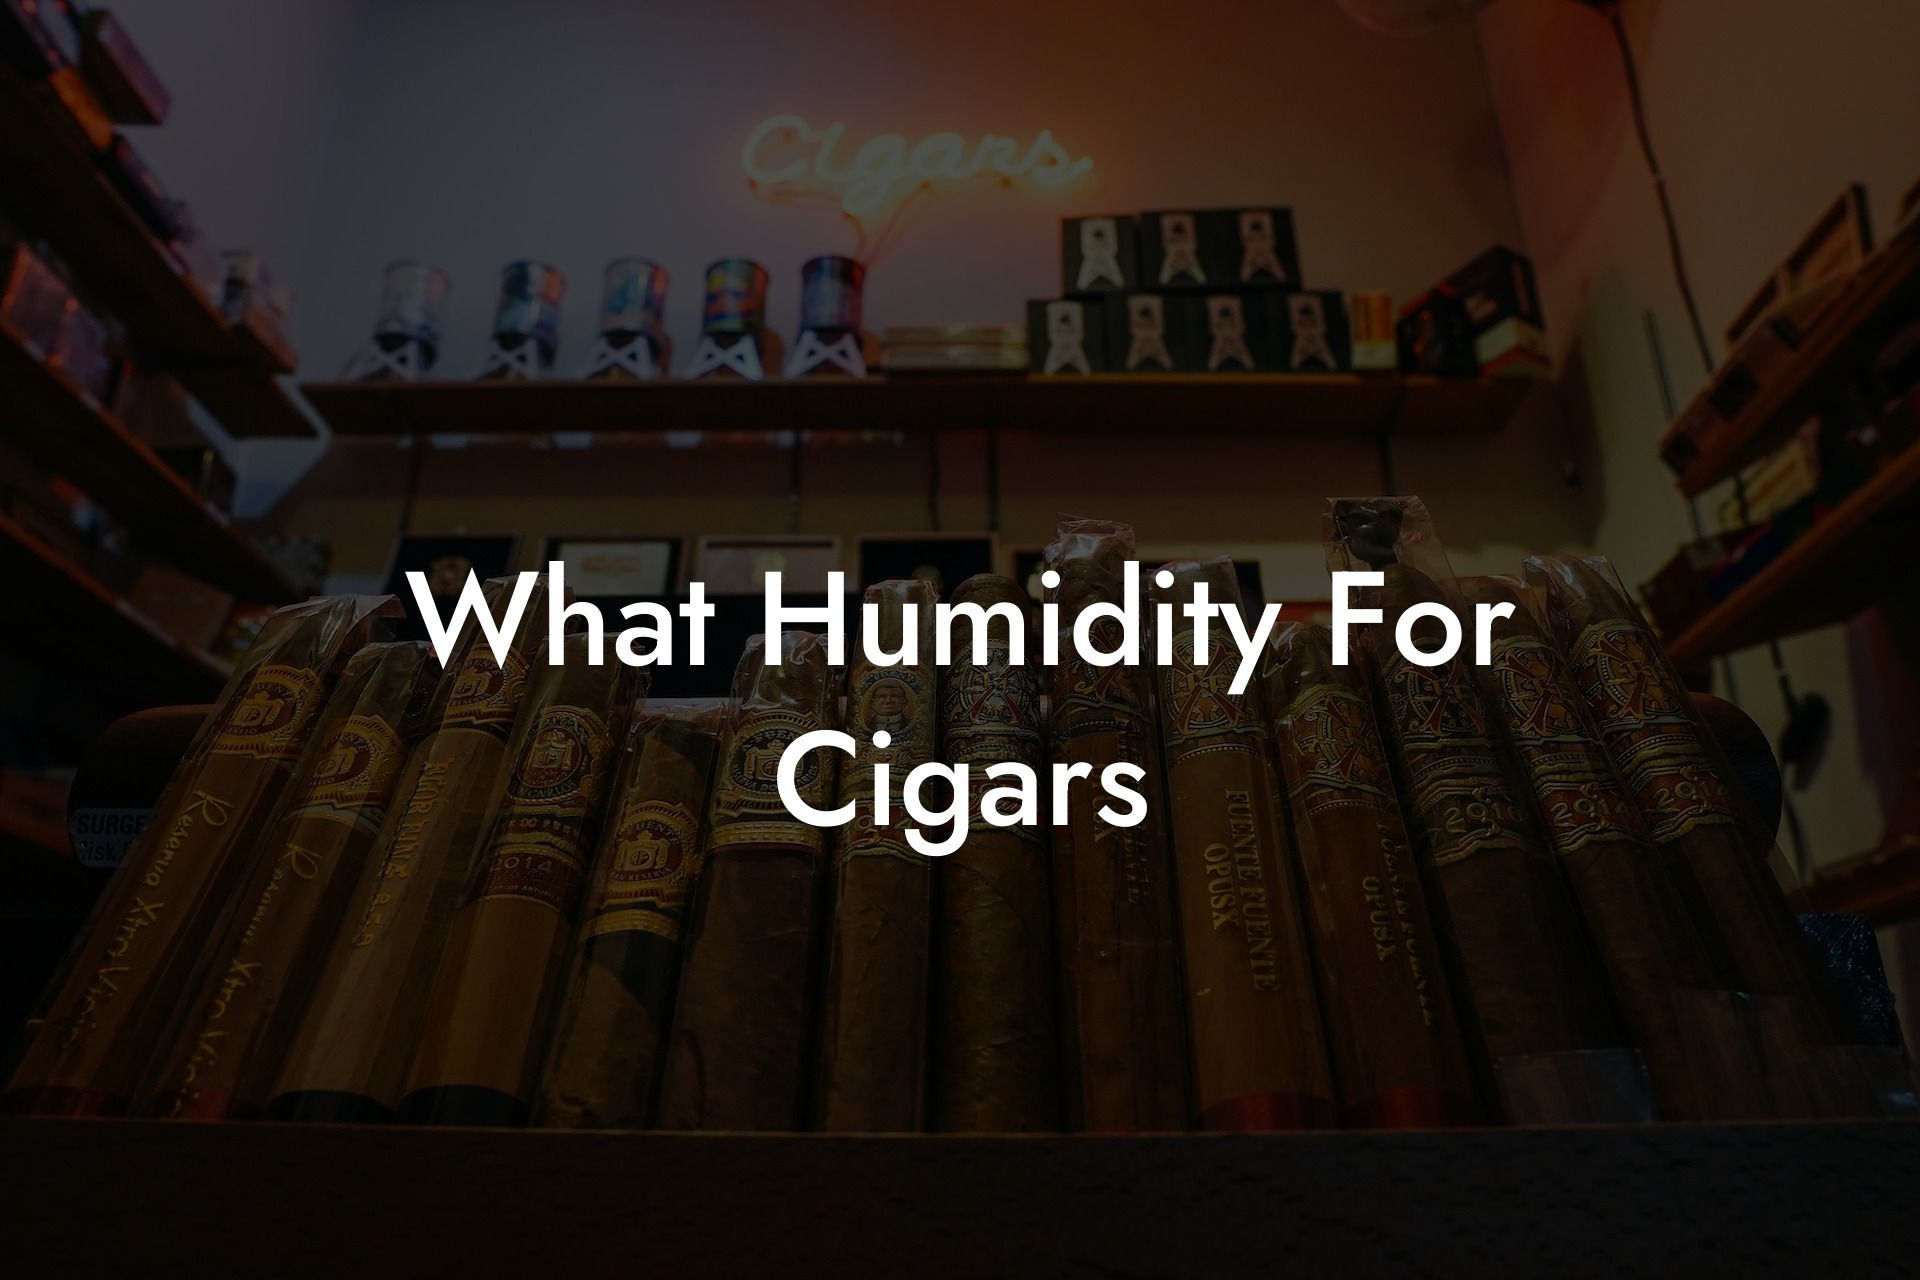 What Humidity For Cigars